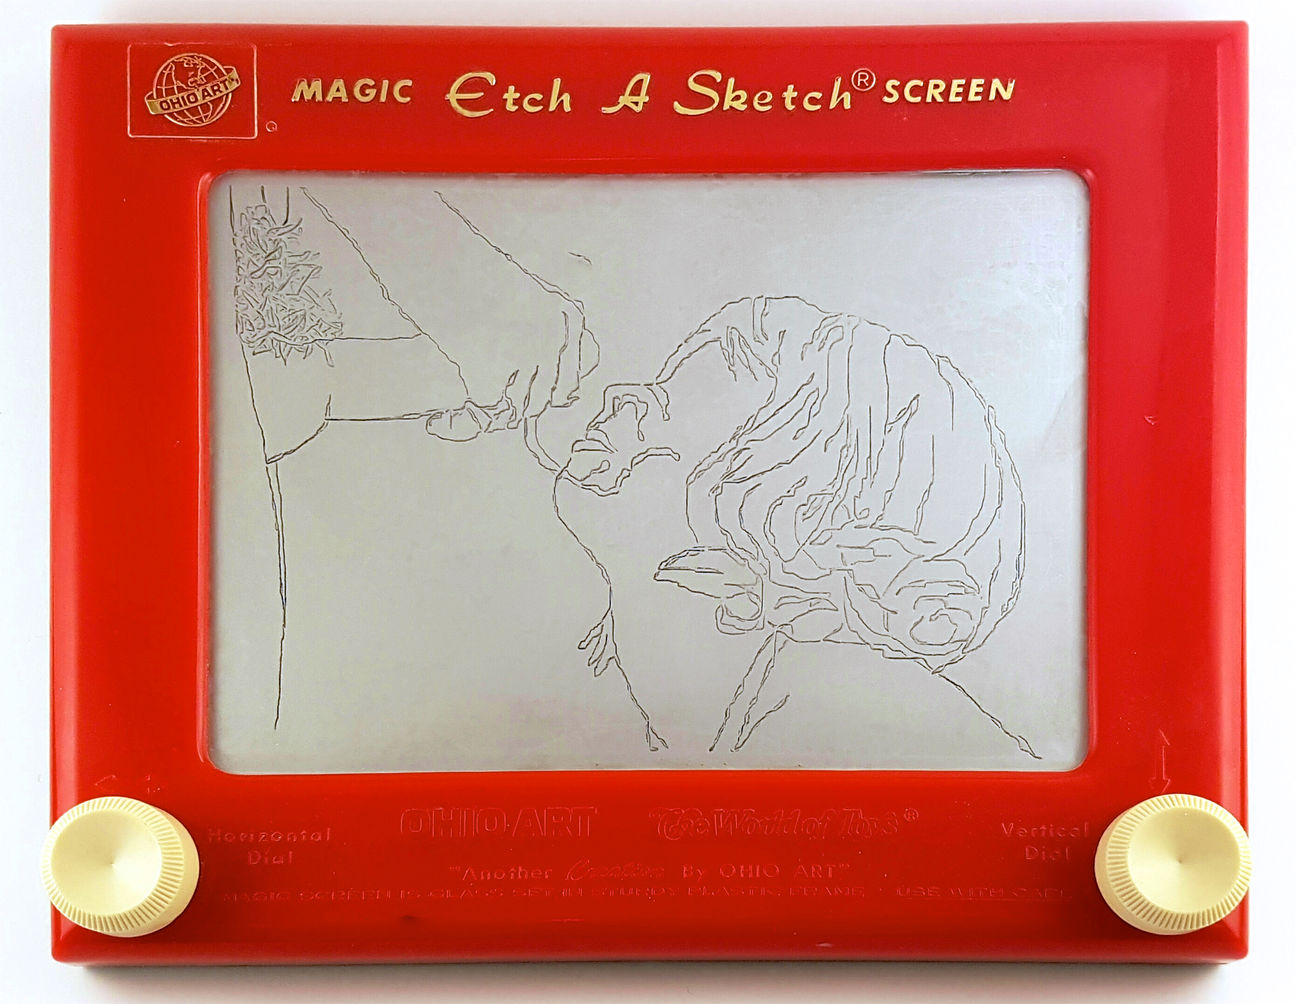 Highly suggestive drawings on an Etch A Sketch